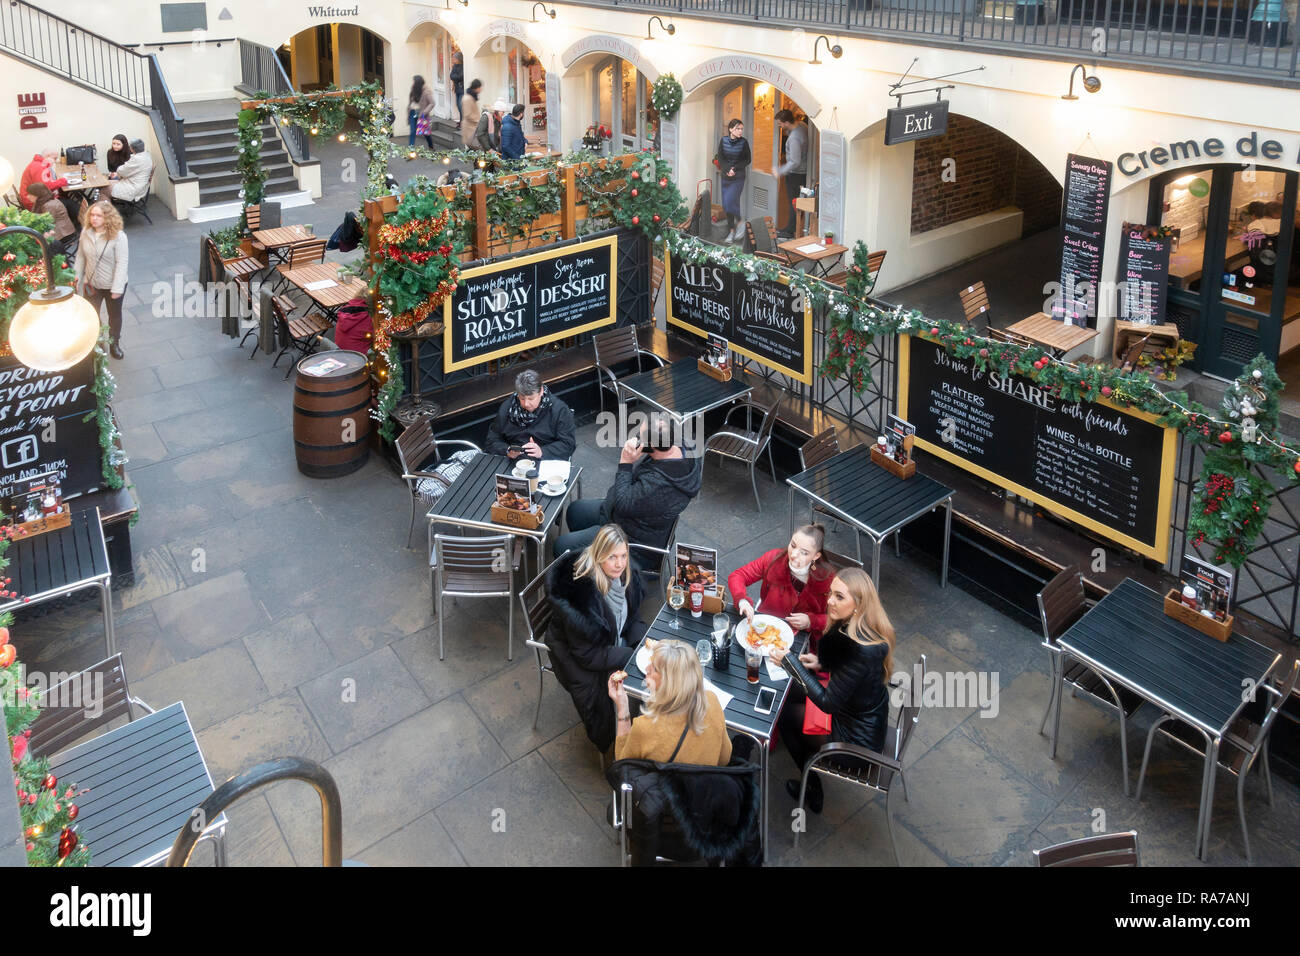 Elevated view of people eating and browsing in the piazza of the Covent Garden Market Building in central London, England, UK. Stock Photo